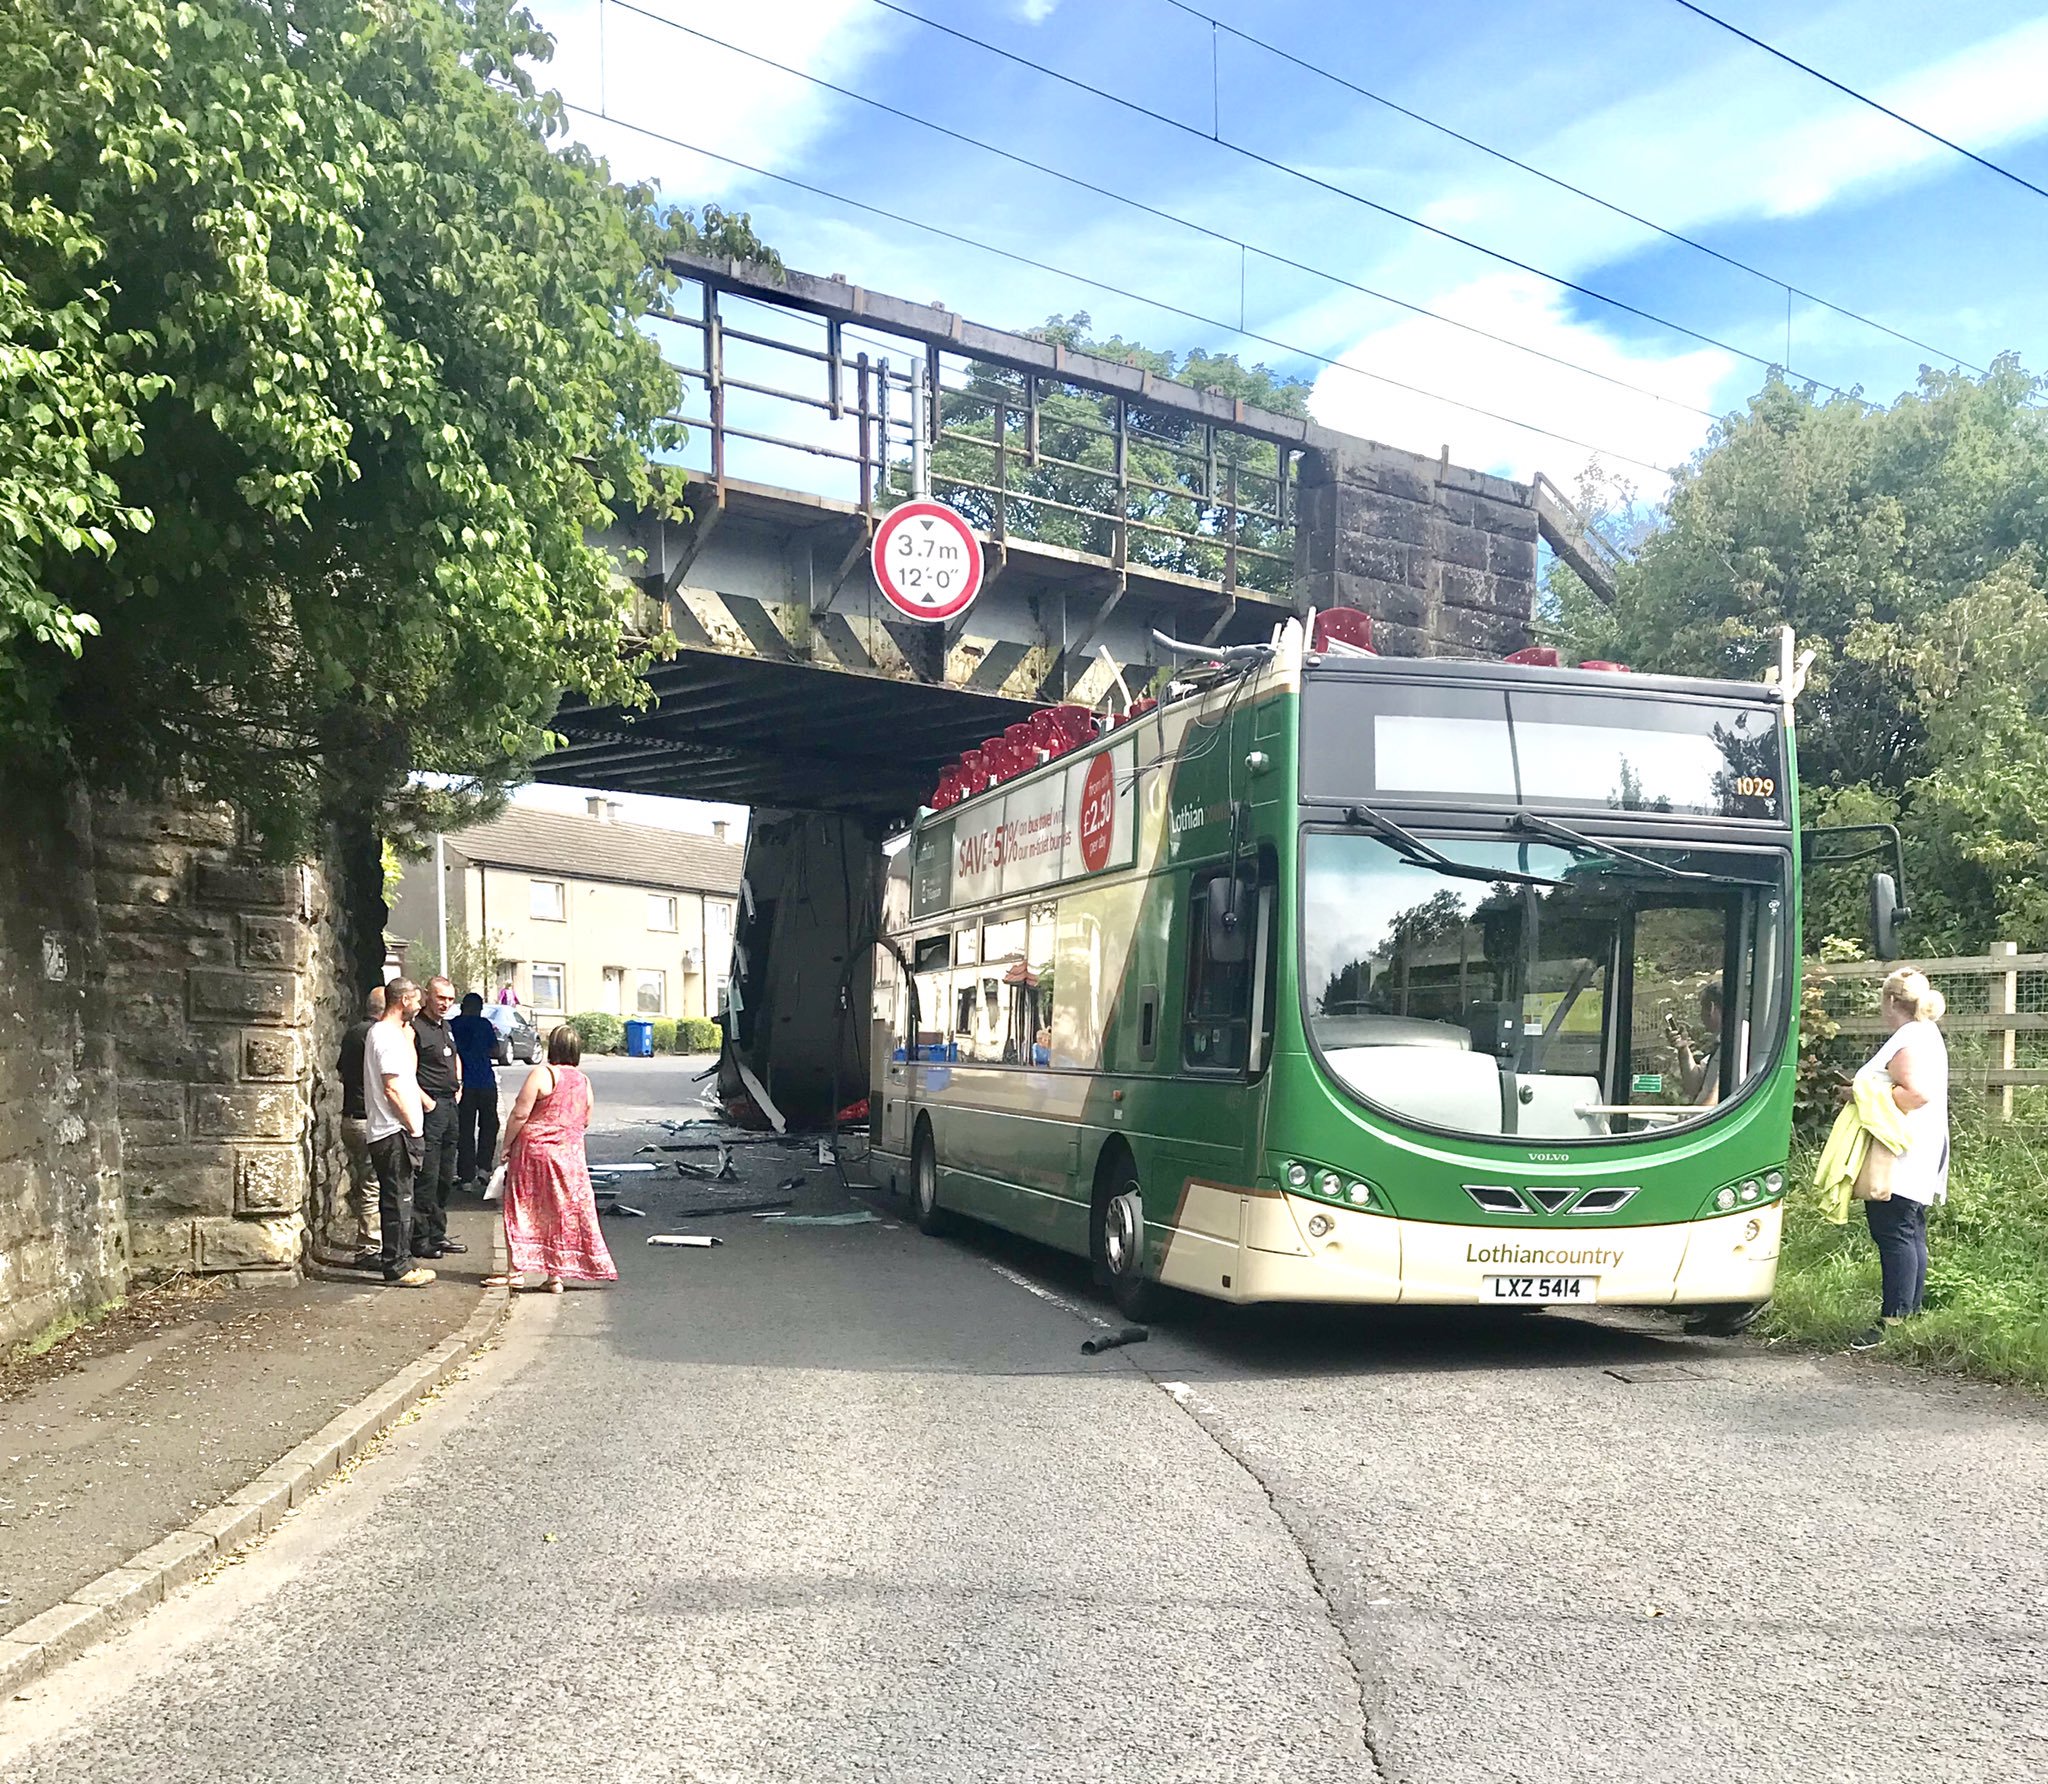 Driver charged after bus roof ripped off in railway bridge crash